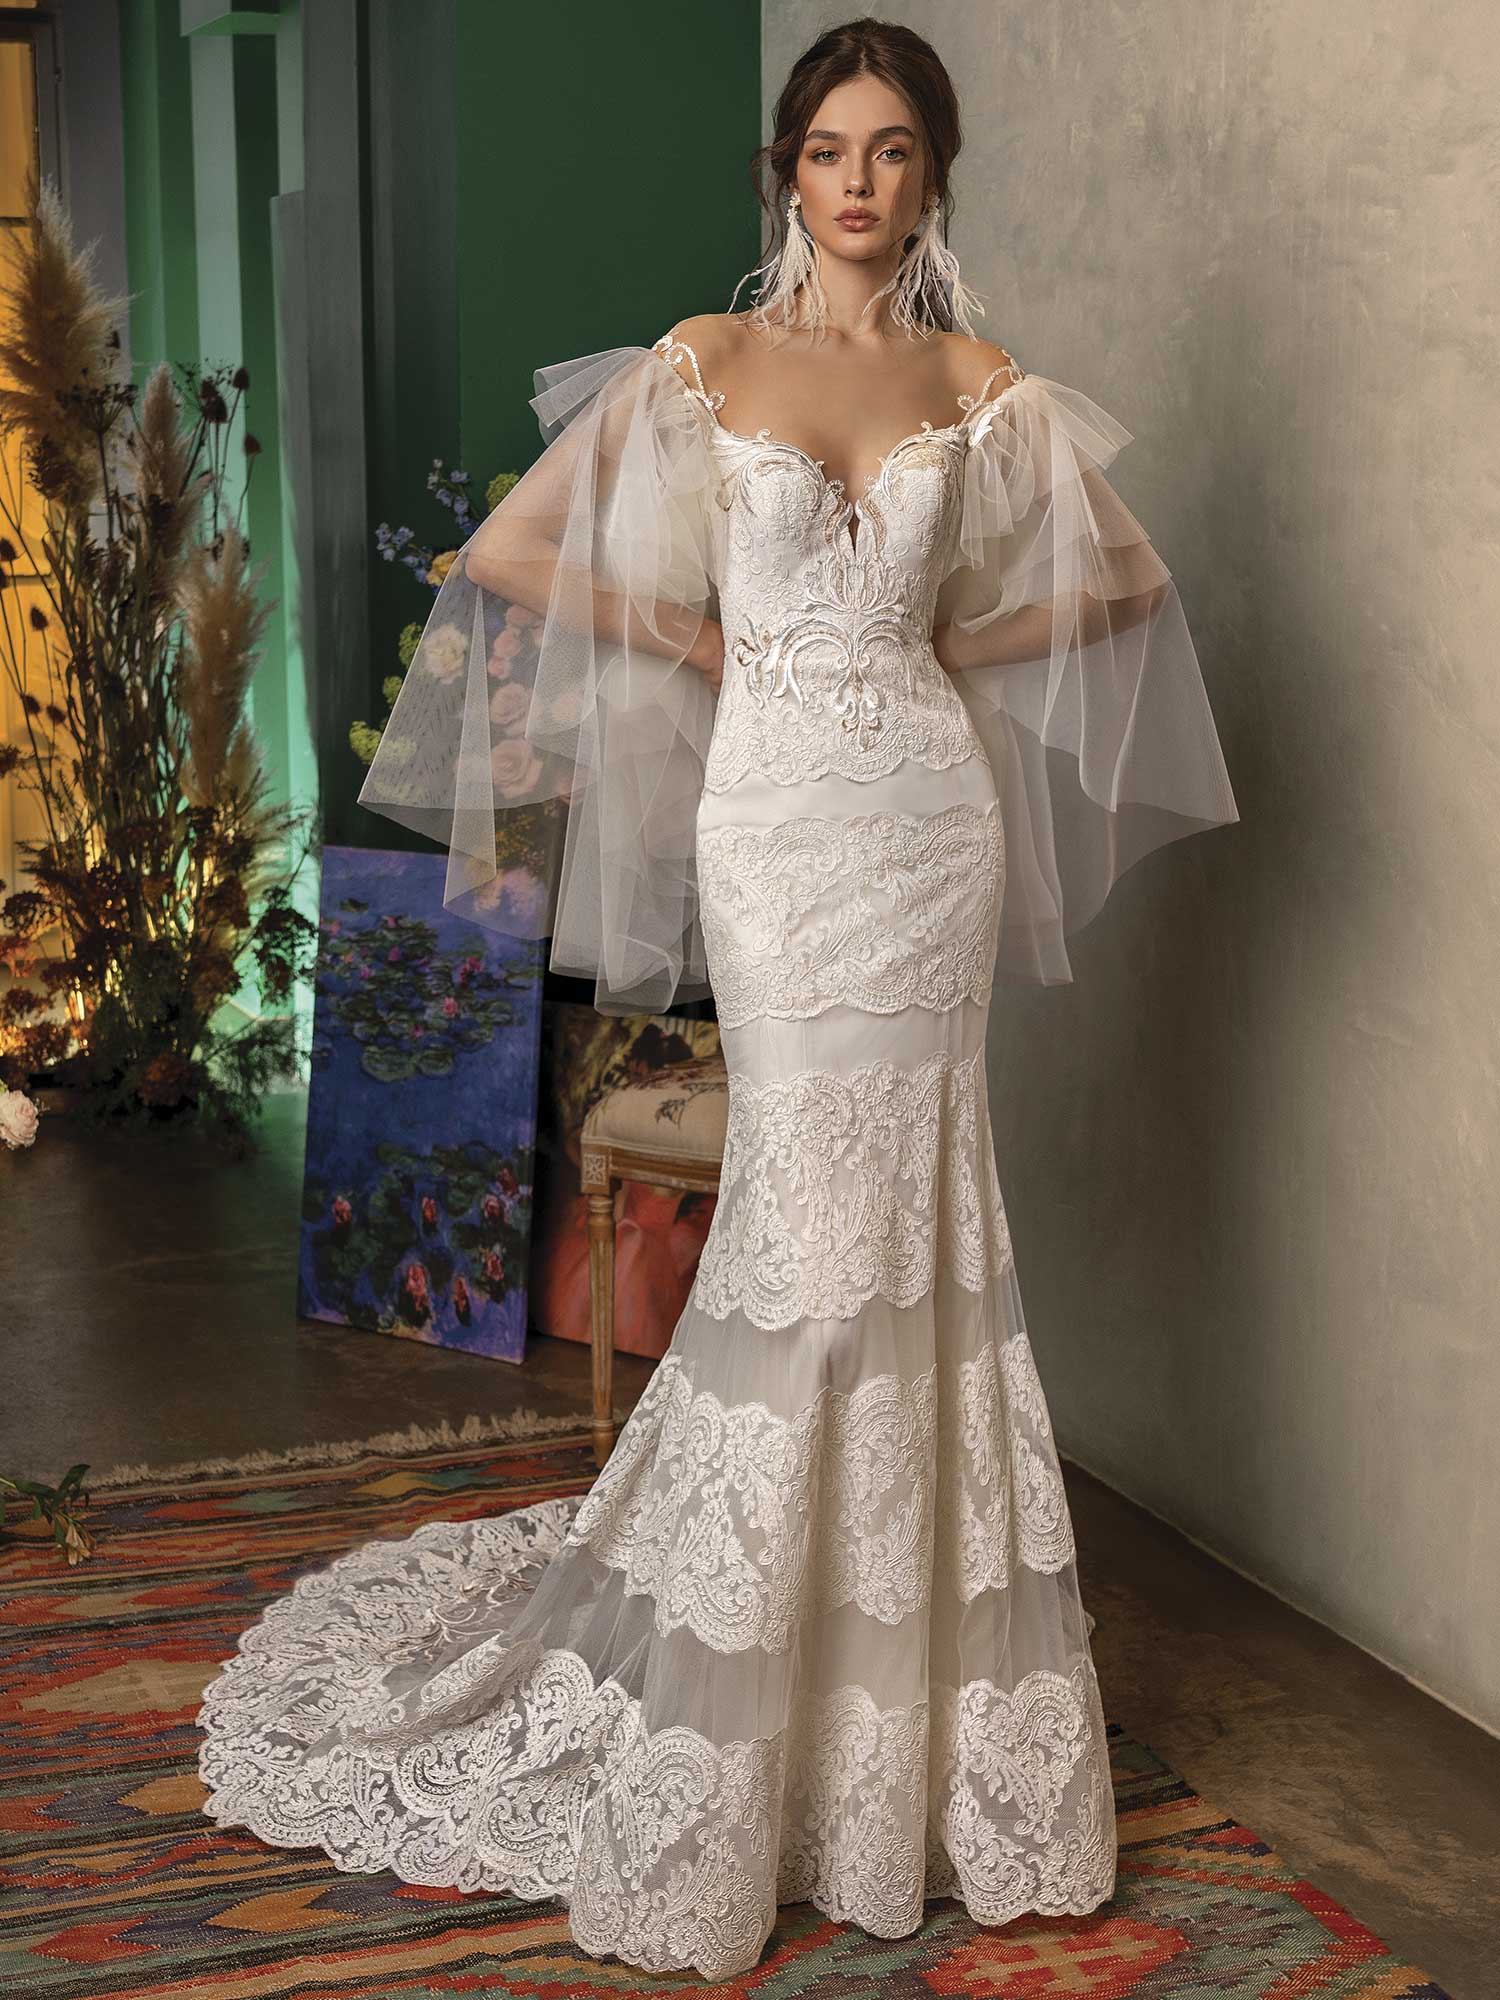 Style #2018L, mermaid wedding dress with bell sleeves, available in ivory